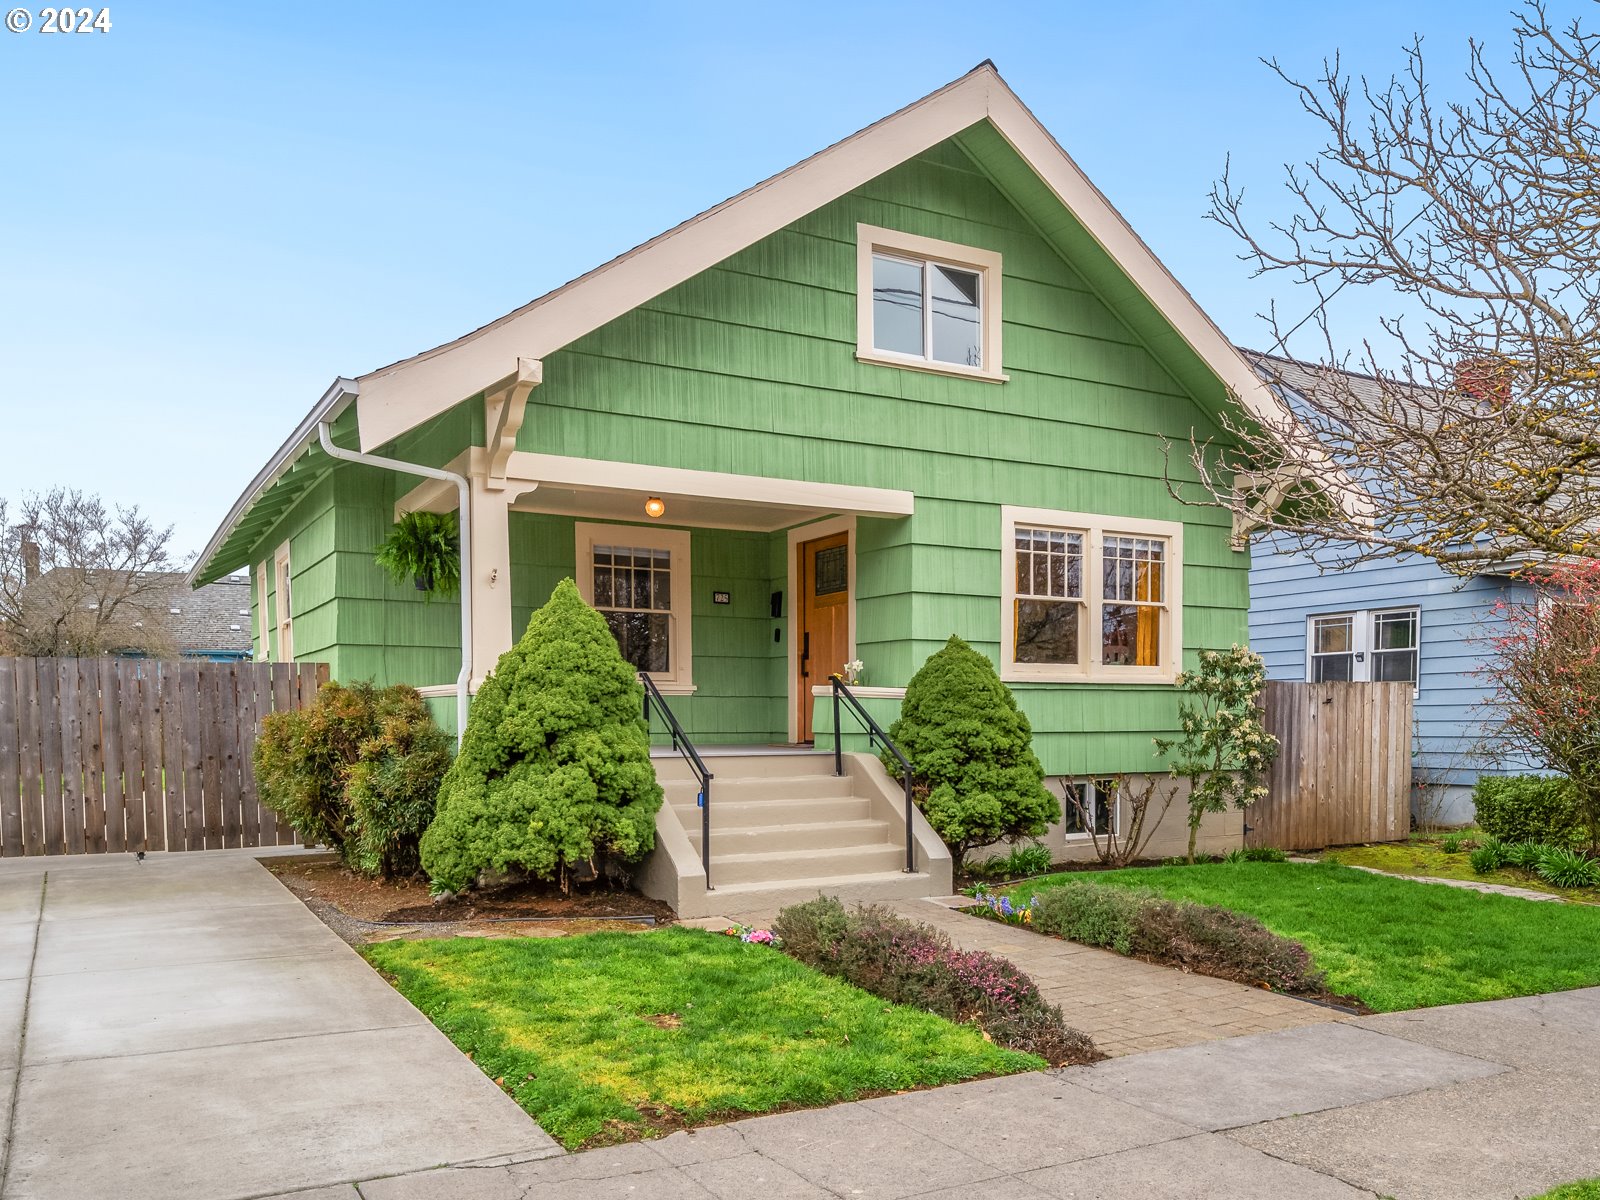 Nestled into one of Portland's most beloved neighborhoods, this 1911 bungalow is refreshingly updated, with classic elements sweetly preserved. Featuring 3-beds, one and a half baths, a spacious basement, and an eye-popping list of seller improvements- this minty scoop is dripping with character, charm, and a sense of community where neighbors are friends.Pocket doors, a clawfoot tub, hidden safe, and gleaming wood floors offer glimpses of a bygone era, when homes were built to last. Modern updates like new wiring & plumbing mean you can move right in and make it yours. Tall ceilings, sun-soaked windows, and fresh interior paint make the space feel fresh- and modern fixtures add elegance throughout. Open living area includes pocket doors, stained glass lighting, and wood fireplace- perfect for cozying up. Formal dining room glows at sunset, with french doors opening out into the yard.The kitchen has ample storage and pantry space, making meal prep a breeze; garden window over the sink is perfect for houseplants & herbs. Owner's suite on the main offers comfort and privacy, with a clawfoot tub to welcome you home at the end of a long day.Upstairs, you'll find two bedrooms (one with Juliet balcony) and a large bonus area, perfect for working from home (or the dressing room of your dreams).Completely re-wired in 2020, with all plumbing (and the sewer line) replaced in 2021. Water heater in 2021, HVAC and mini splits in 2023. Large basement with tall ceilings has been plumbed to add a bathroom. Sunny (and fenced) backyard is dog & garden-ready, with space for summertime soirées with friends and neighbors. The side gate opens all the way up- so you can roll your adventure rig right into the yard. Six blocks from the heart of Montavilla, with restaurants, shops, the Academy Theater, and Sunday Farmer's Market nearby. Public park and community pool two blocks away. This one won't last long. Scoop it up while you can! [Home Energy Score = 5. HES Report at https://rpt.greenbuildingregistry.com/hes/OR10226223]